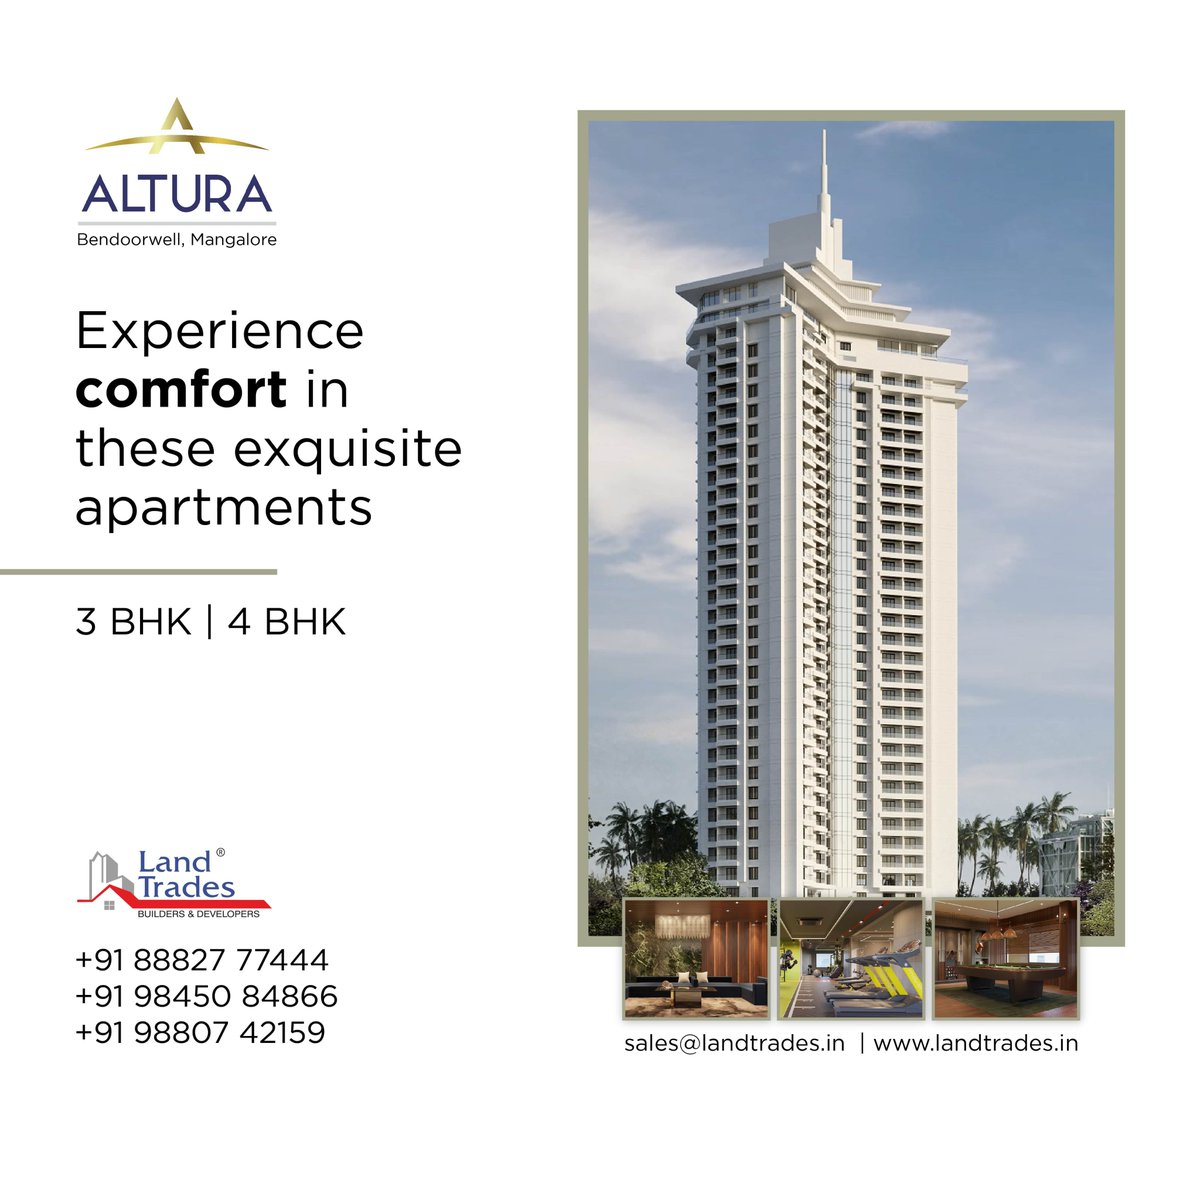 Elevate your lifestyle with the exclusivity of Land Trades Altura. 𝐃𝐢𝐬𝐜𝐨𝐯𝐞𝐫 𝐬𝐩𝐚𝐜𝐢𝐨𝐮𝐬 𝟑 𝐁𝐇𝐊 𝐚𝐧𝐝 𝟒 𝐁𝐇𝐊 𝐟𝐥𝐚𝐭𝐬 𝐚𝐯𝐚𝐢𝐥𝐚𝐛𝐥𝐞 𝐟𝐨𝐫 𝐬𝐚𝐥𝐞 𝐢𝐧 𝐌𝐚𝐧𝐠𝐚𝐥𝐨𝐫𝐞, your perfect home awaits.

#3bhkflatsforsale #4bhkflatsforsale #flatsforsale